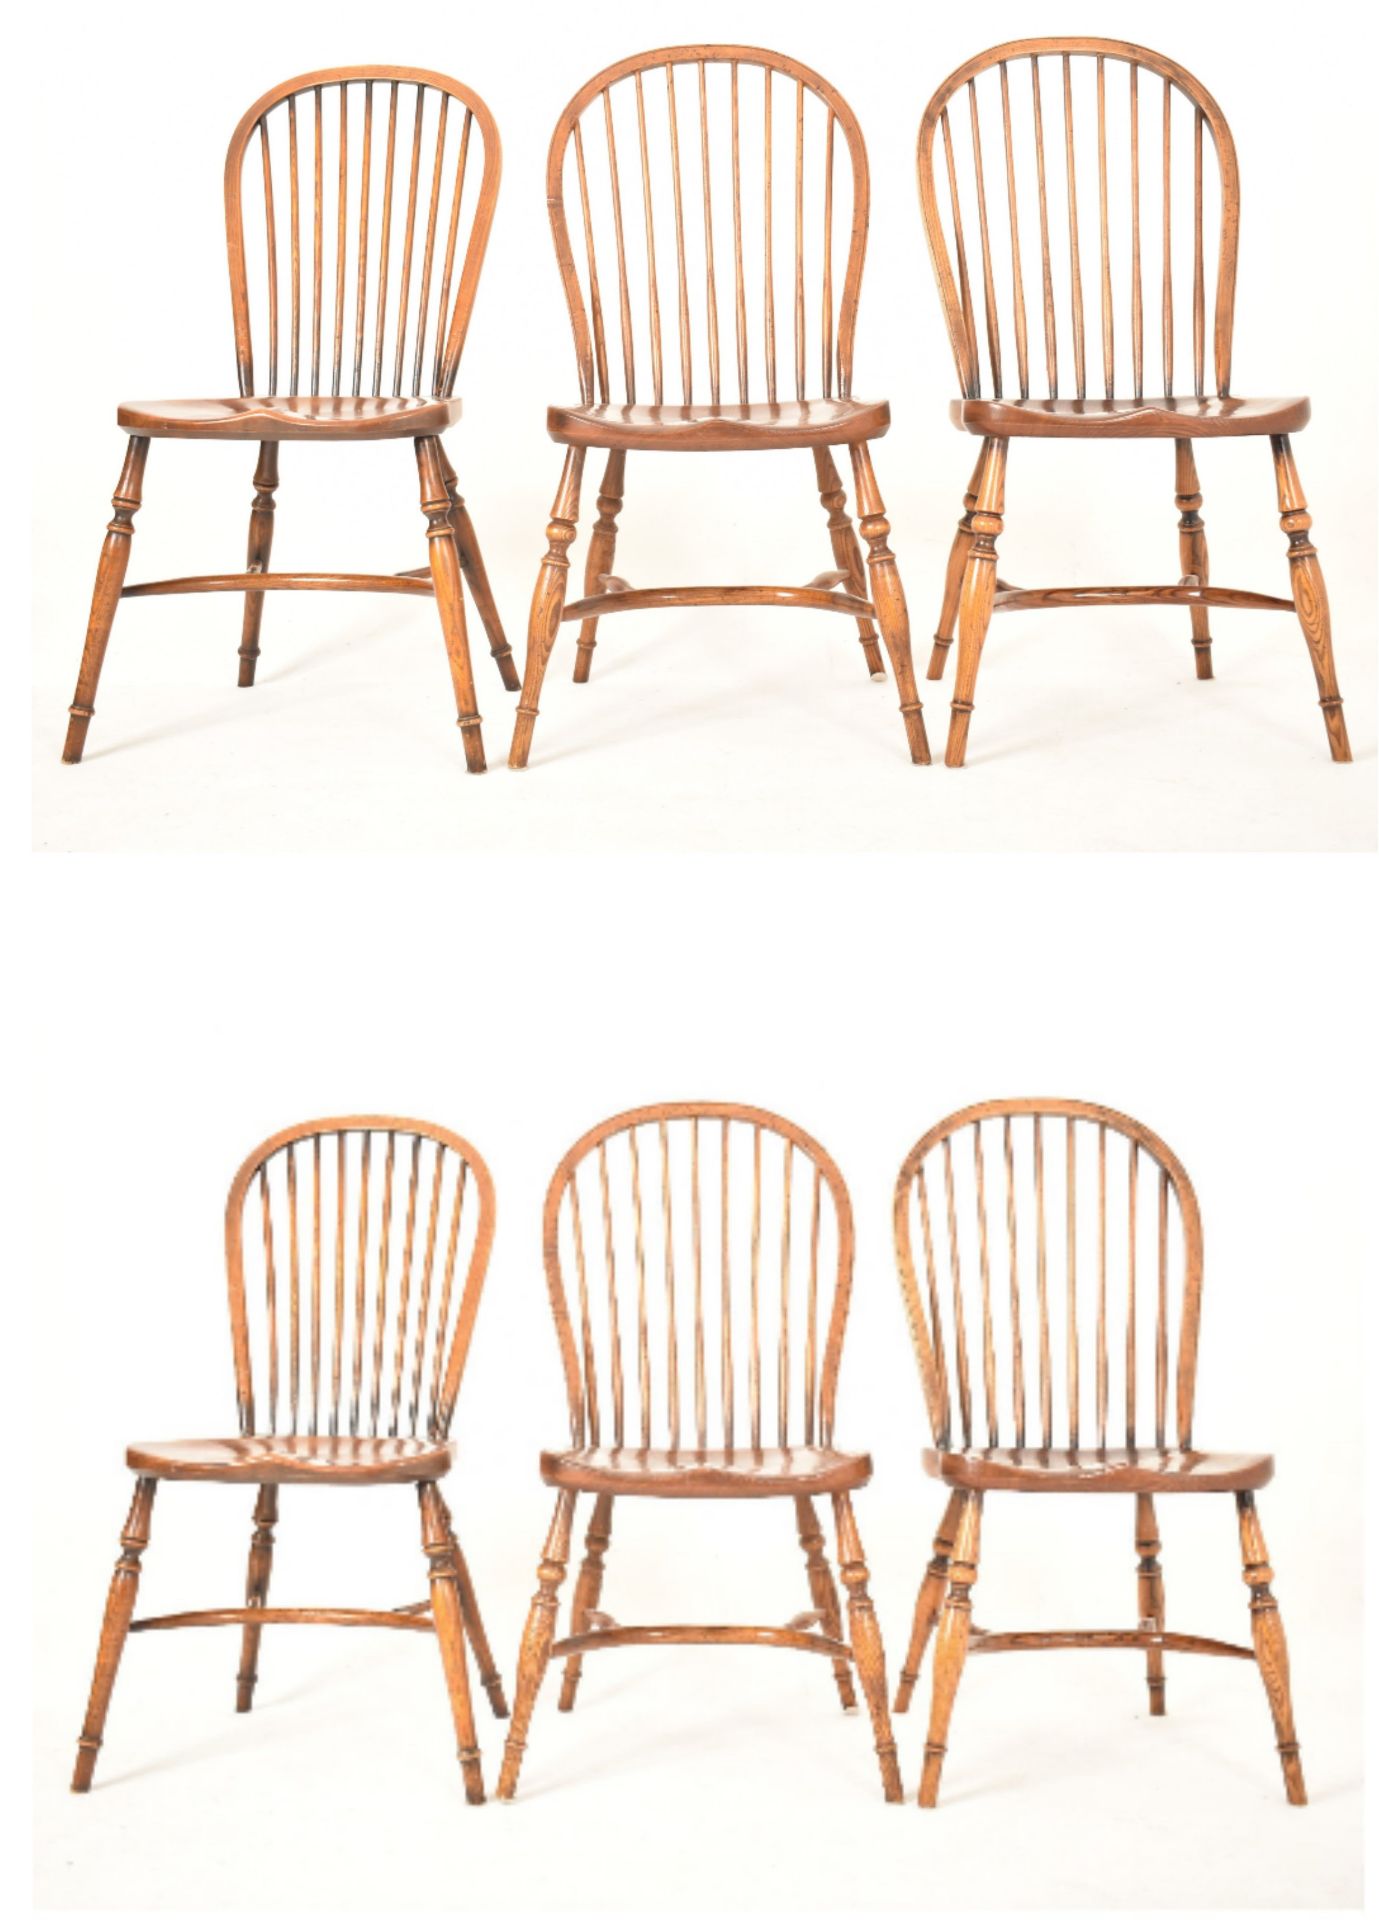 STEWART LINFORD FURNITURE - SIX WINDSOR STYLE STICK BACK CHAIRS